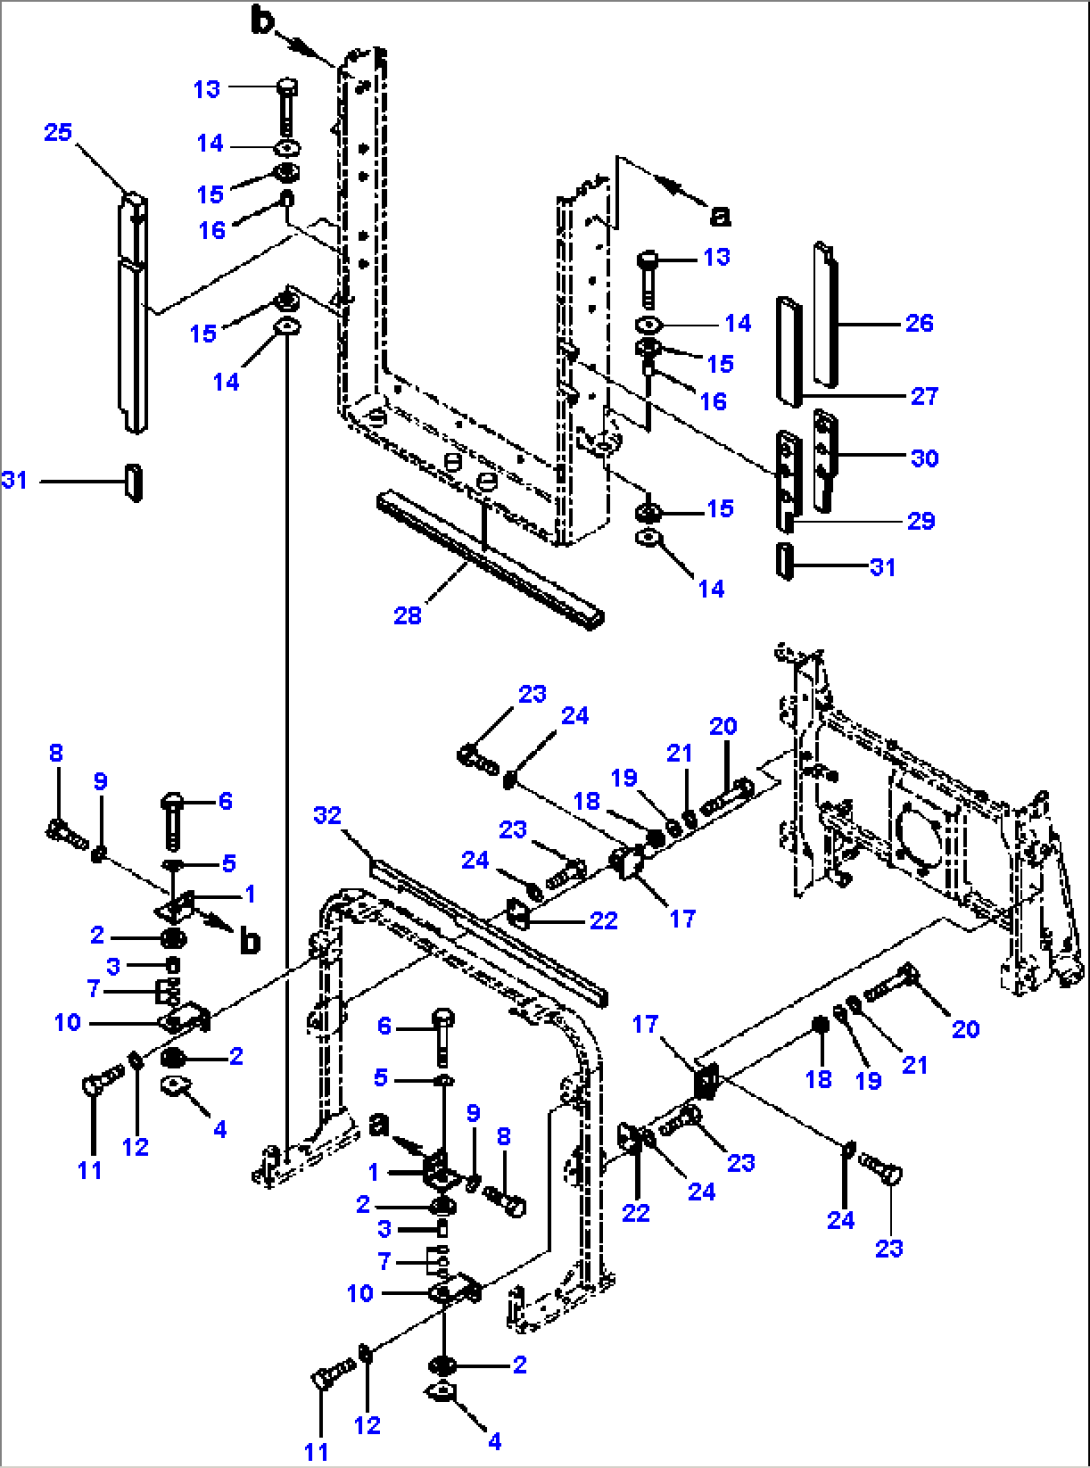 C0110-02A0 RADIATOR UPPER SUPPORT AND SHEETS